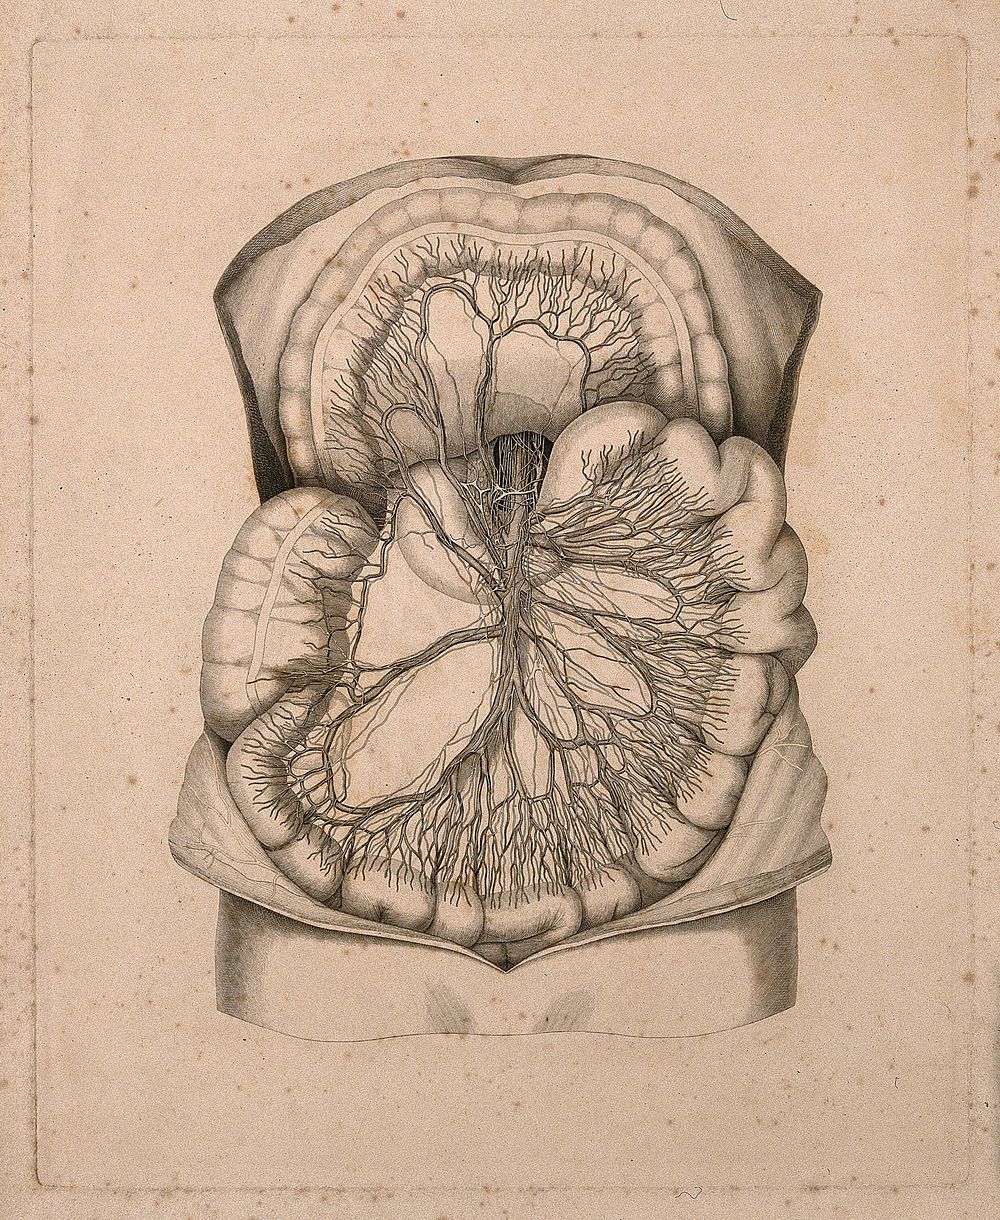 Contents of the abdominal cavity. Line engraving.